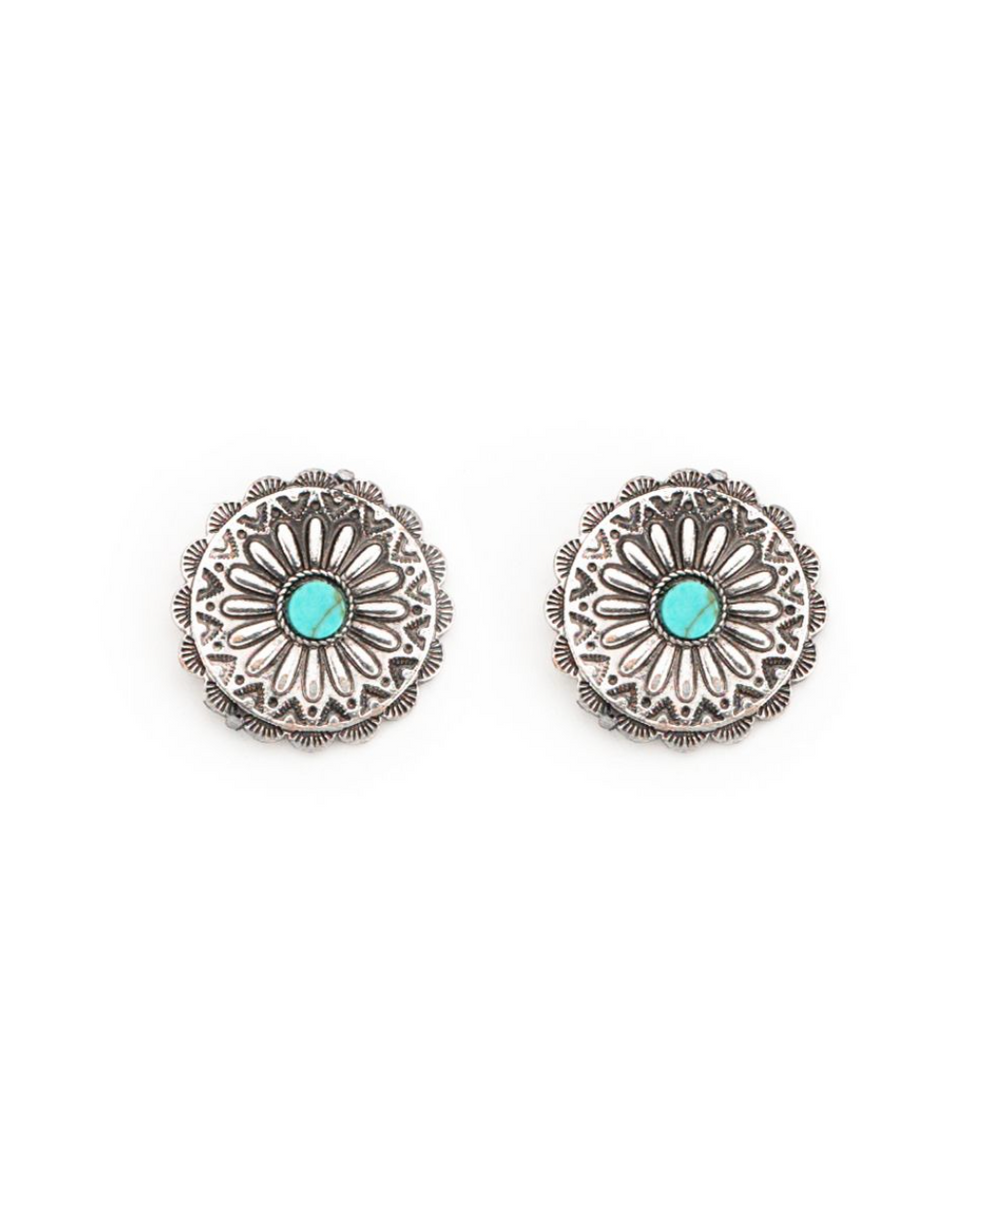 1" Burnished Silver Flower Concho Post Earring with Turquoise Accent